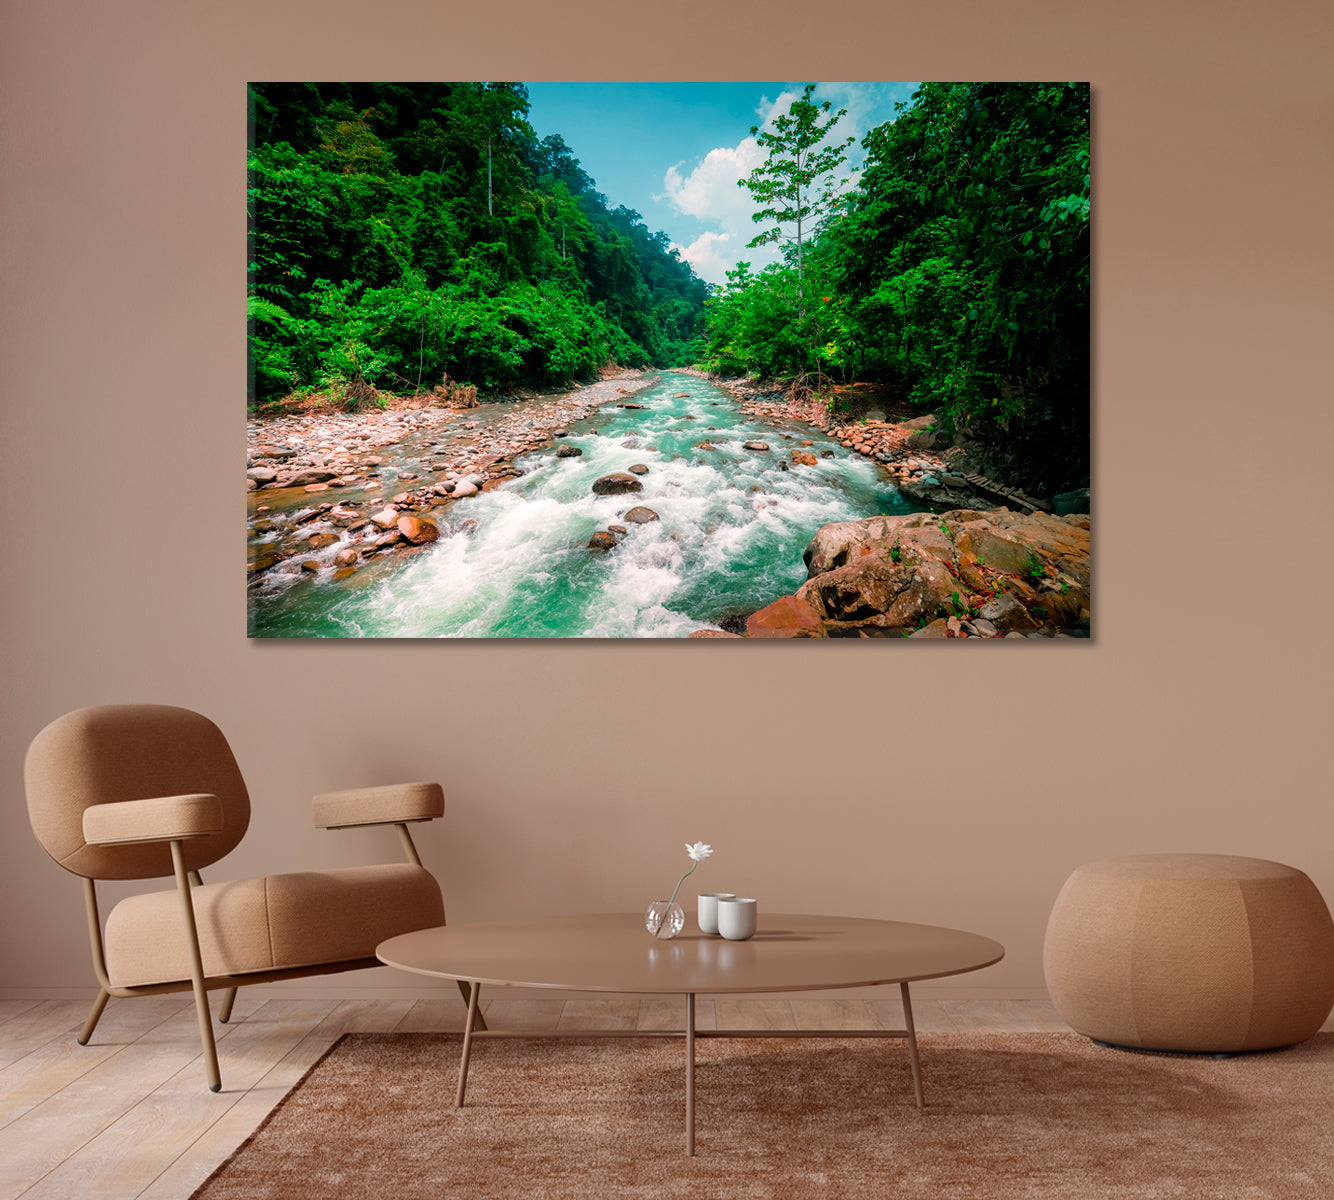 Magical Scenery of Rainforest and River with Rocks Canvas Print-Canvas Print-CetArt-1 Panel-24x16 inches-CetArt